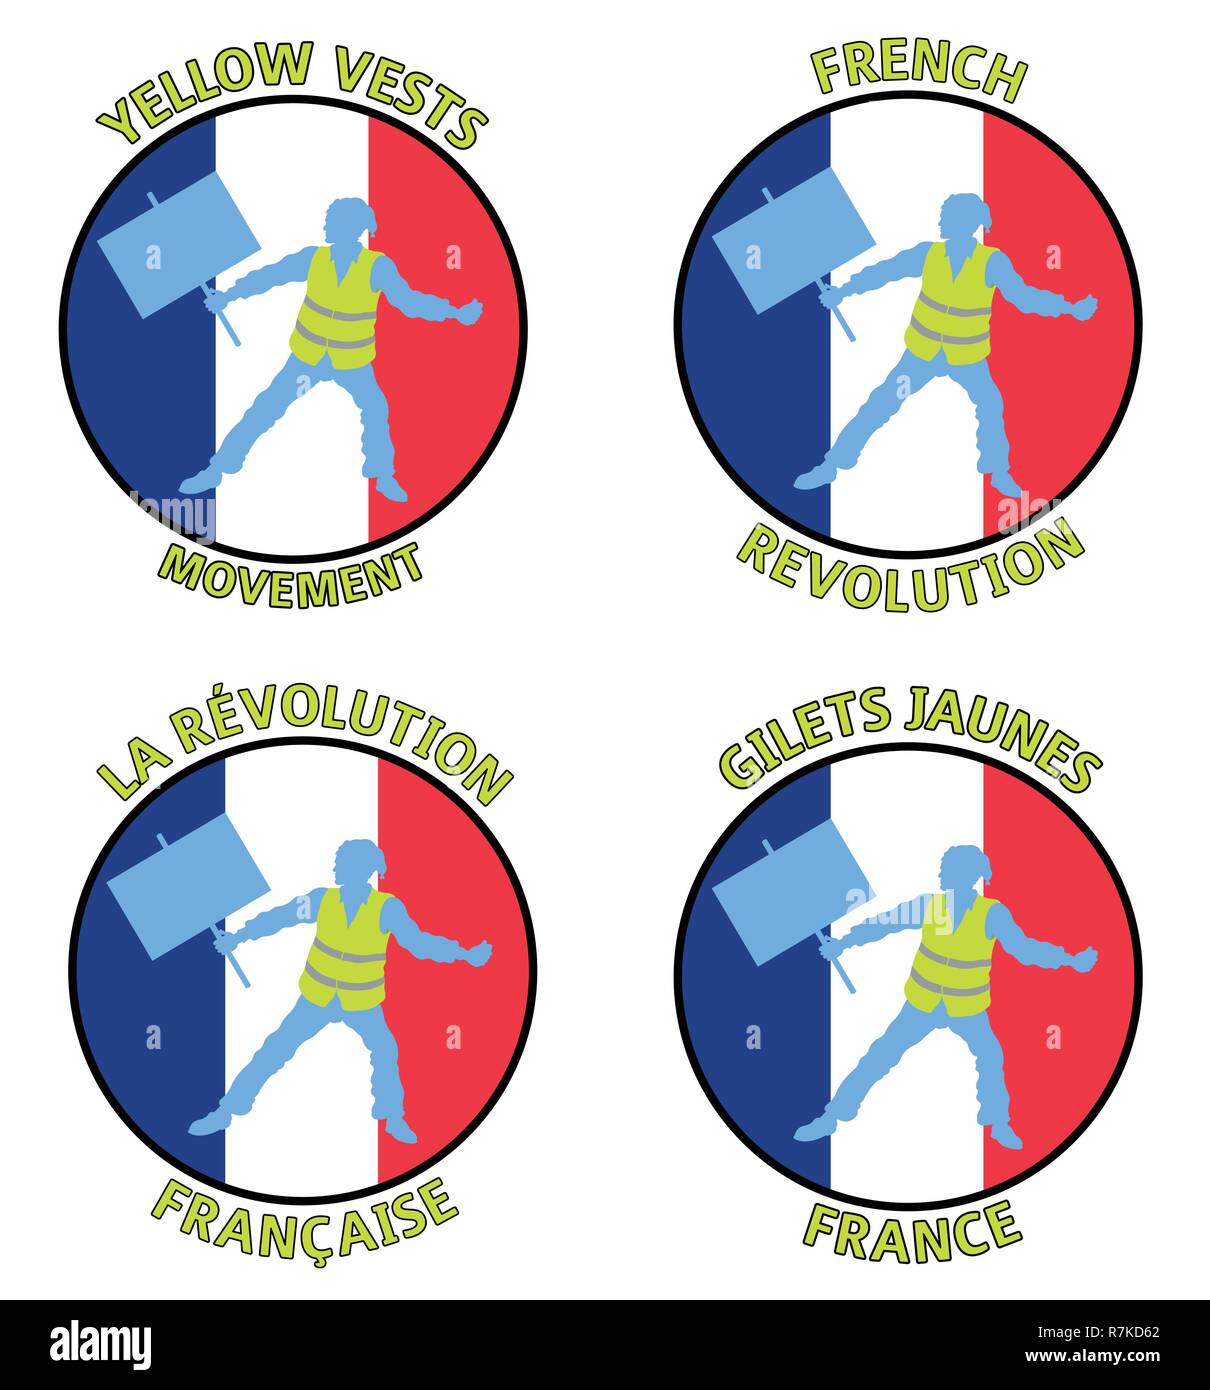 Yellow vests protester silhouette designs with French flag. All the objects are in different layers and the text types do not need any font. Stock Vector